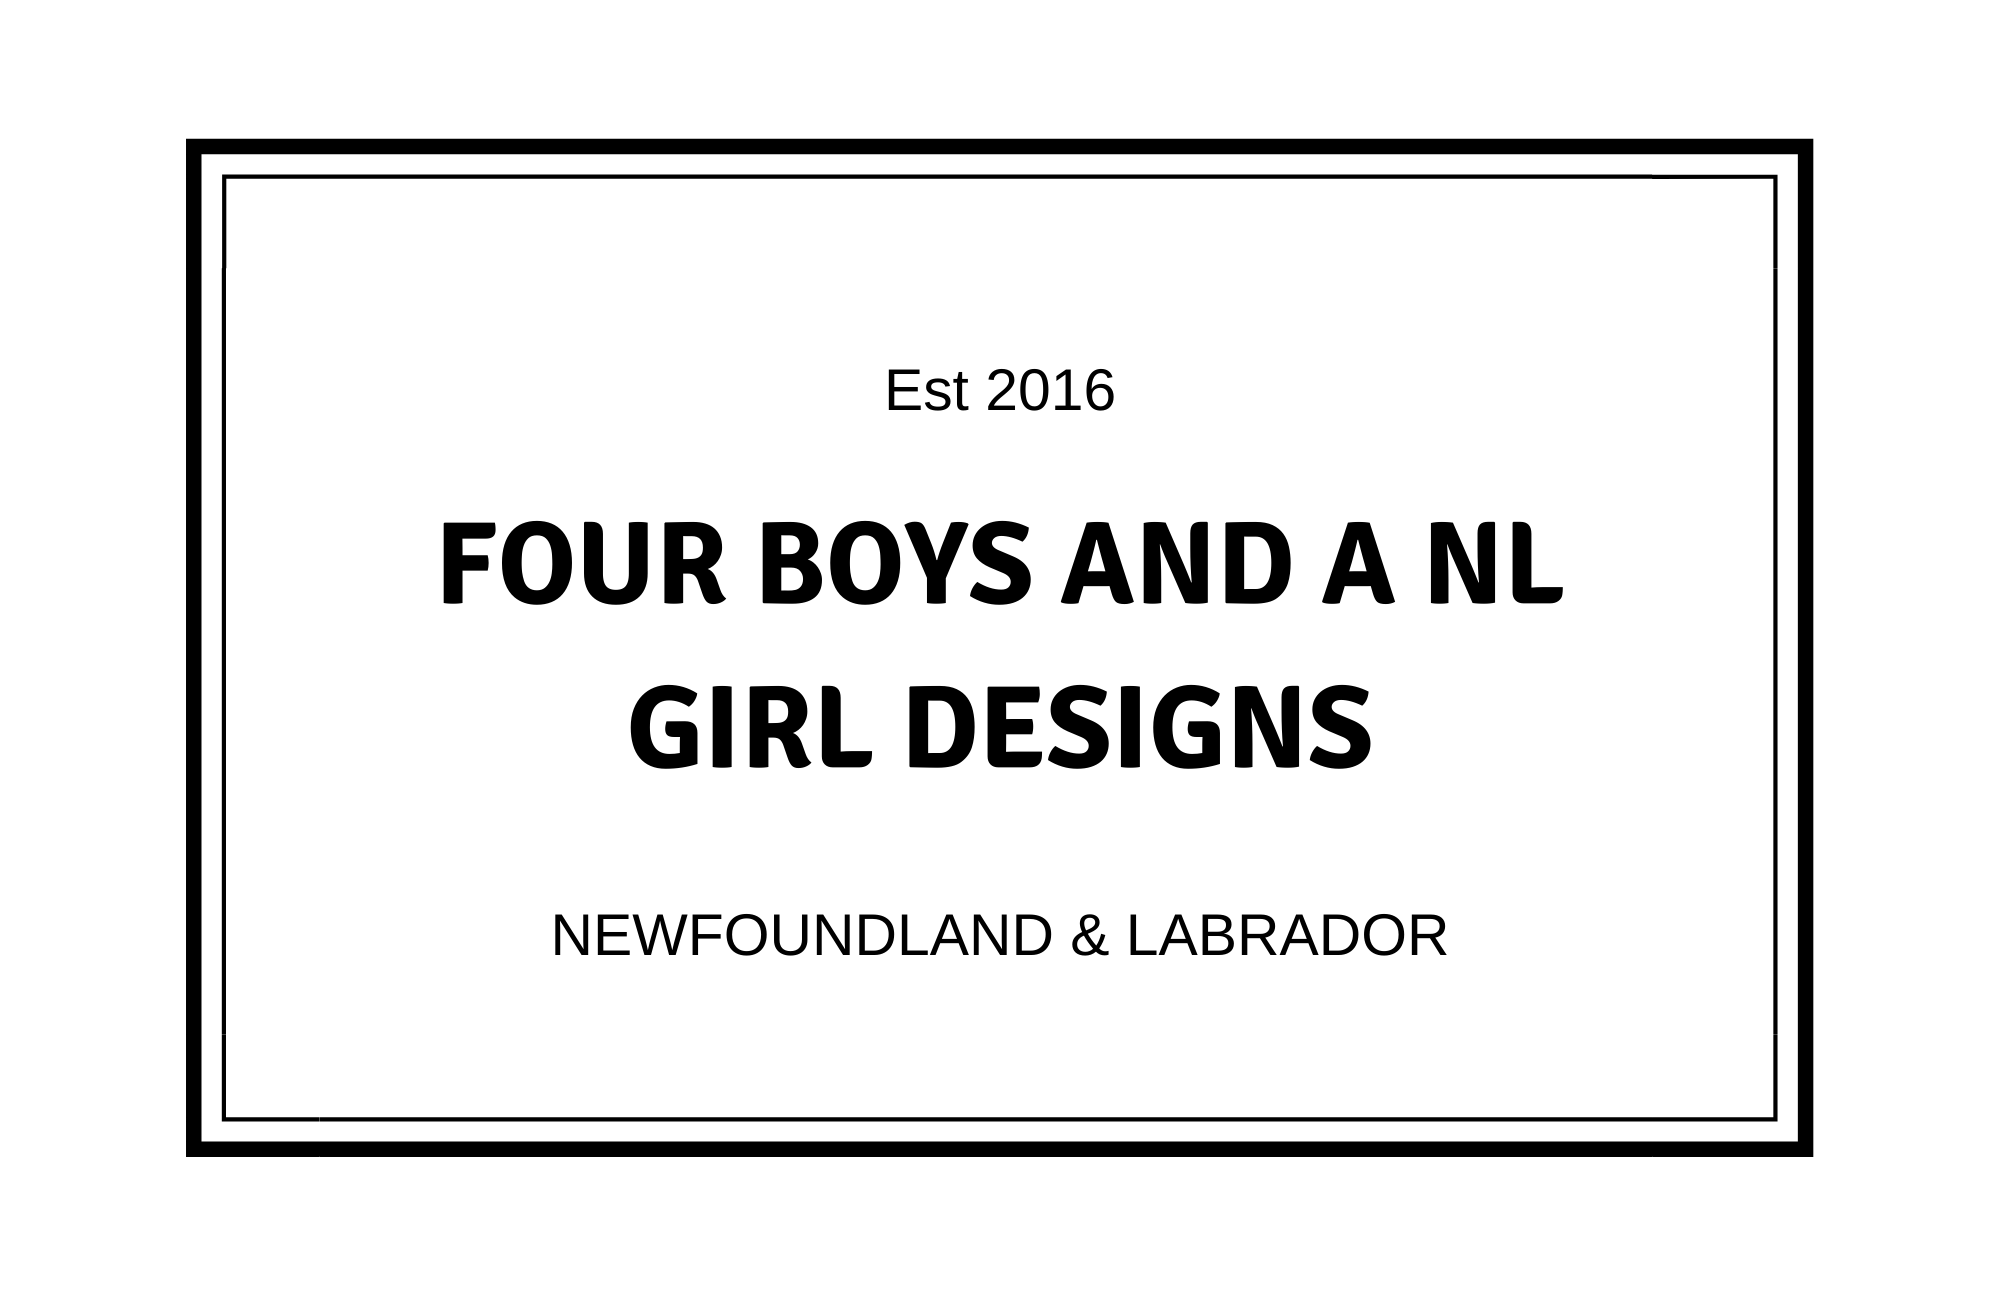 Rectangle surrounded by two black lines with words Est. 2016, FOUR BOYS AND A NL GIRL DESIGNS Newfoundland & Labrador inside.